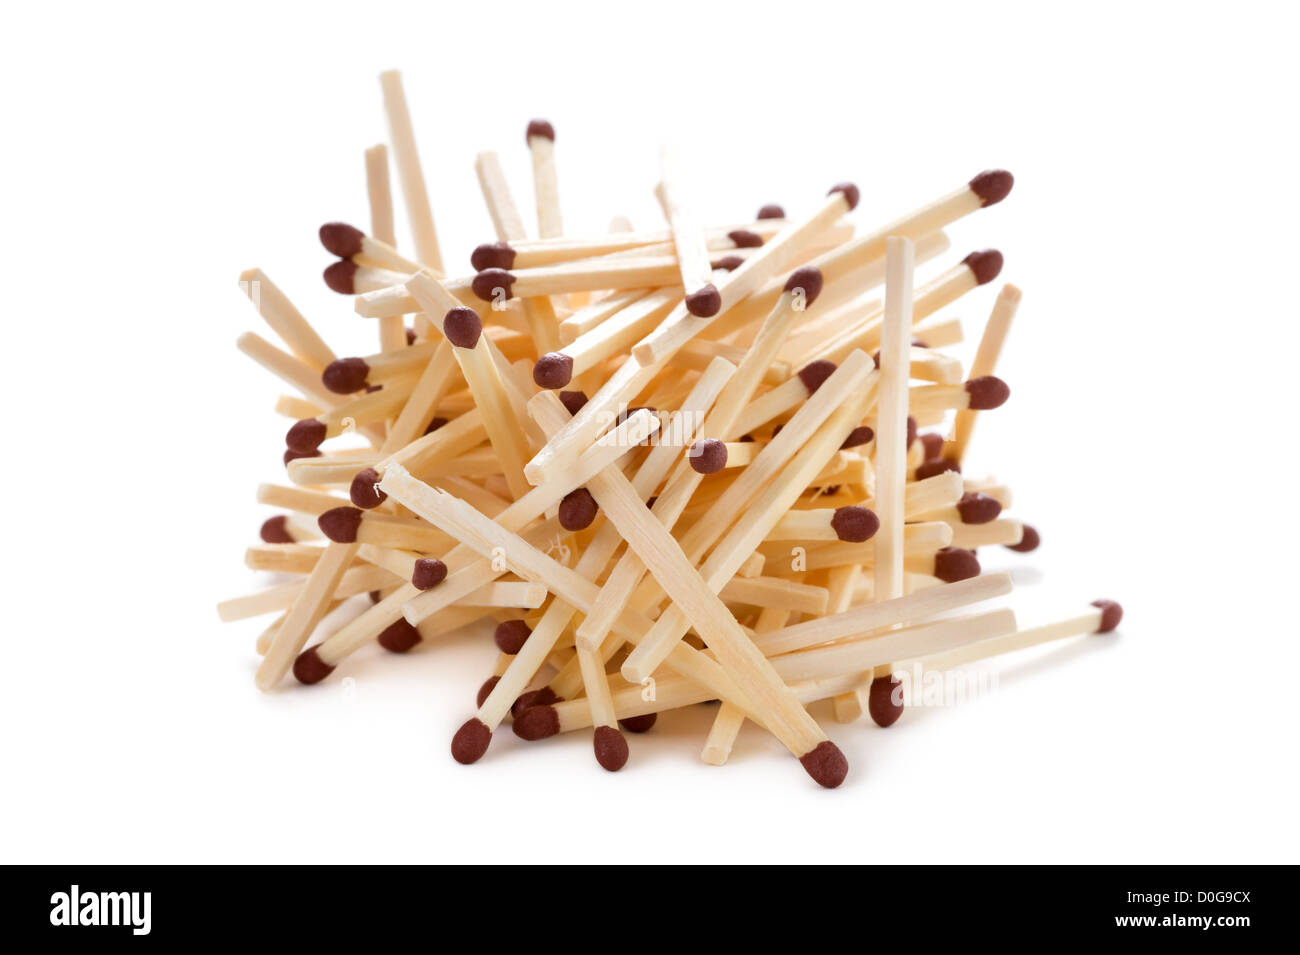 a pile of matches or matchsticks isolated on a white background Stock Photo